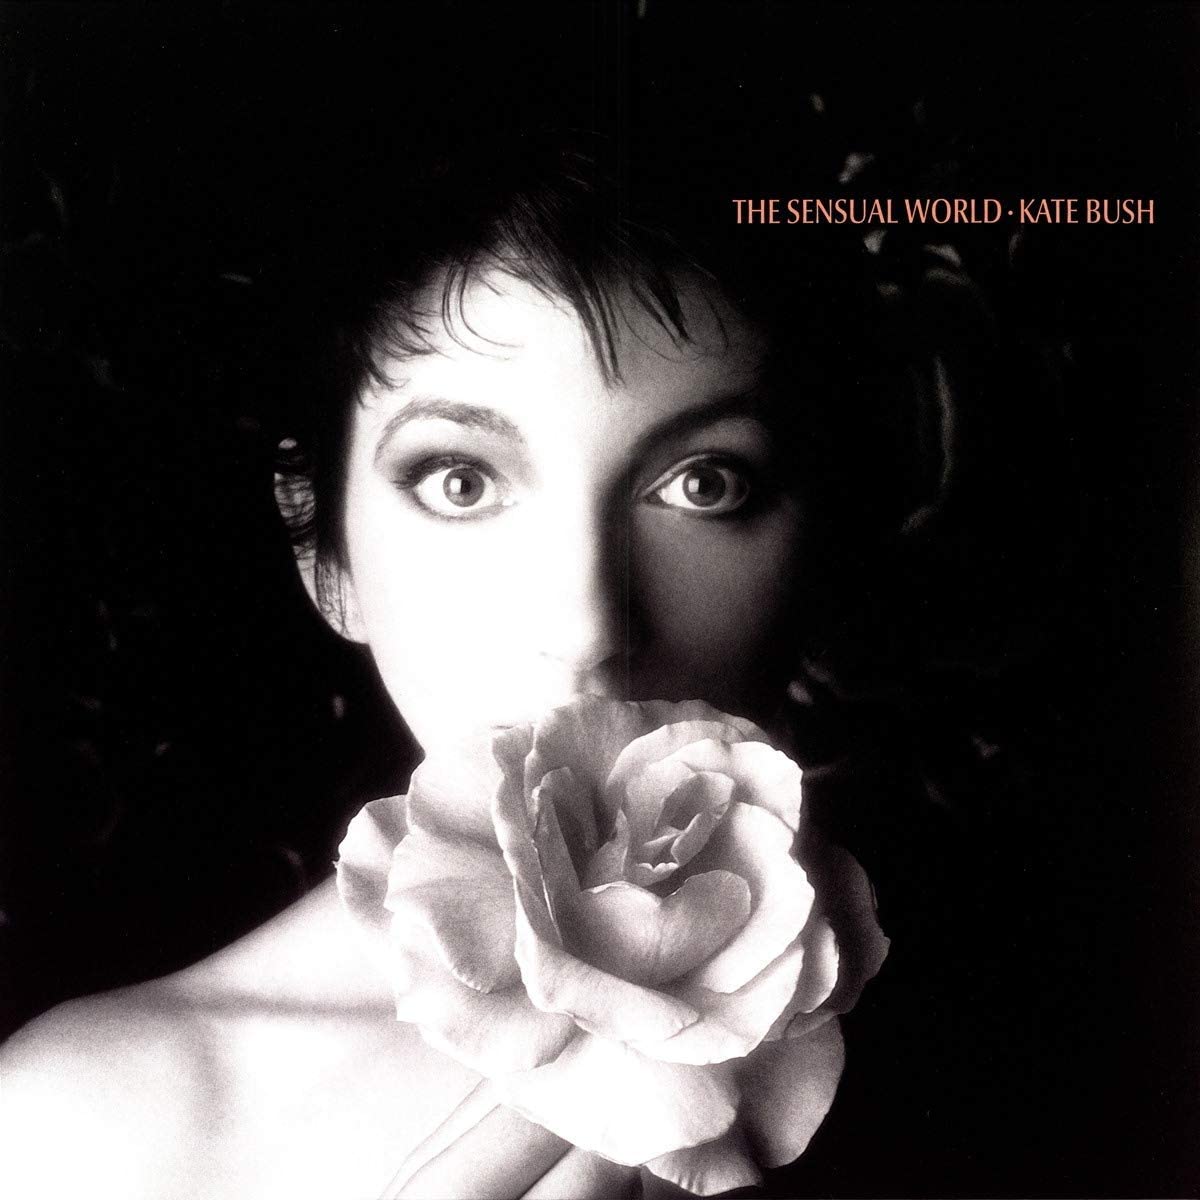 Sixth studio album on Vinyl by the Kate Bush featuring the singles 'The Sensual World', 'This Woman's Work' and 'Love and Anger'.